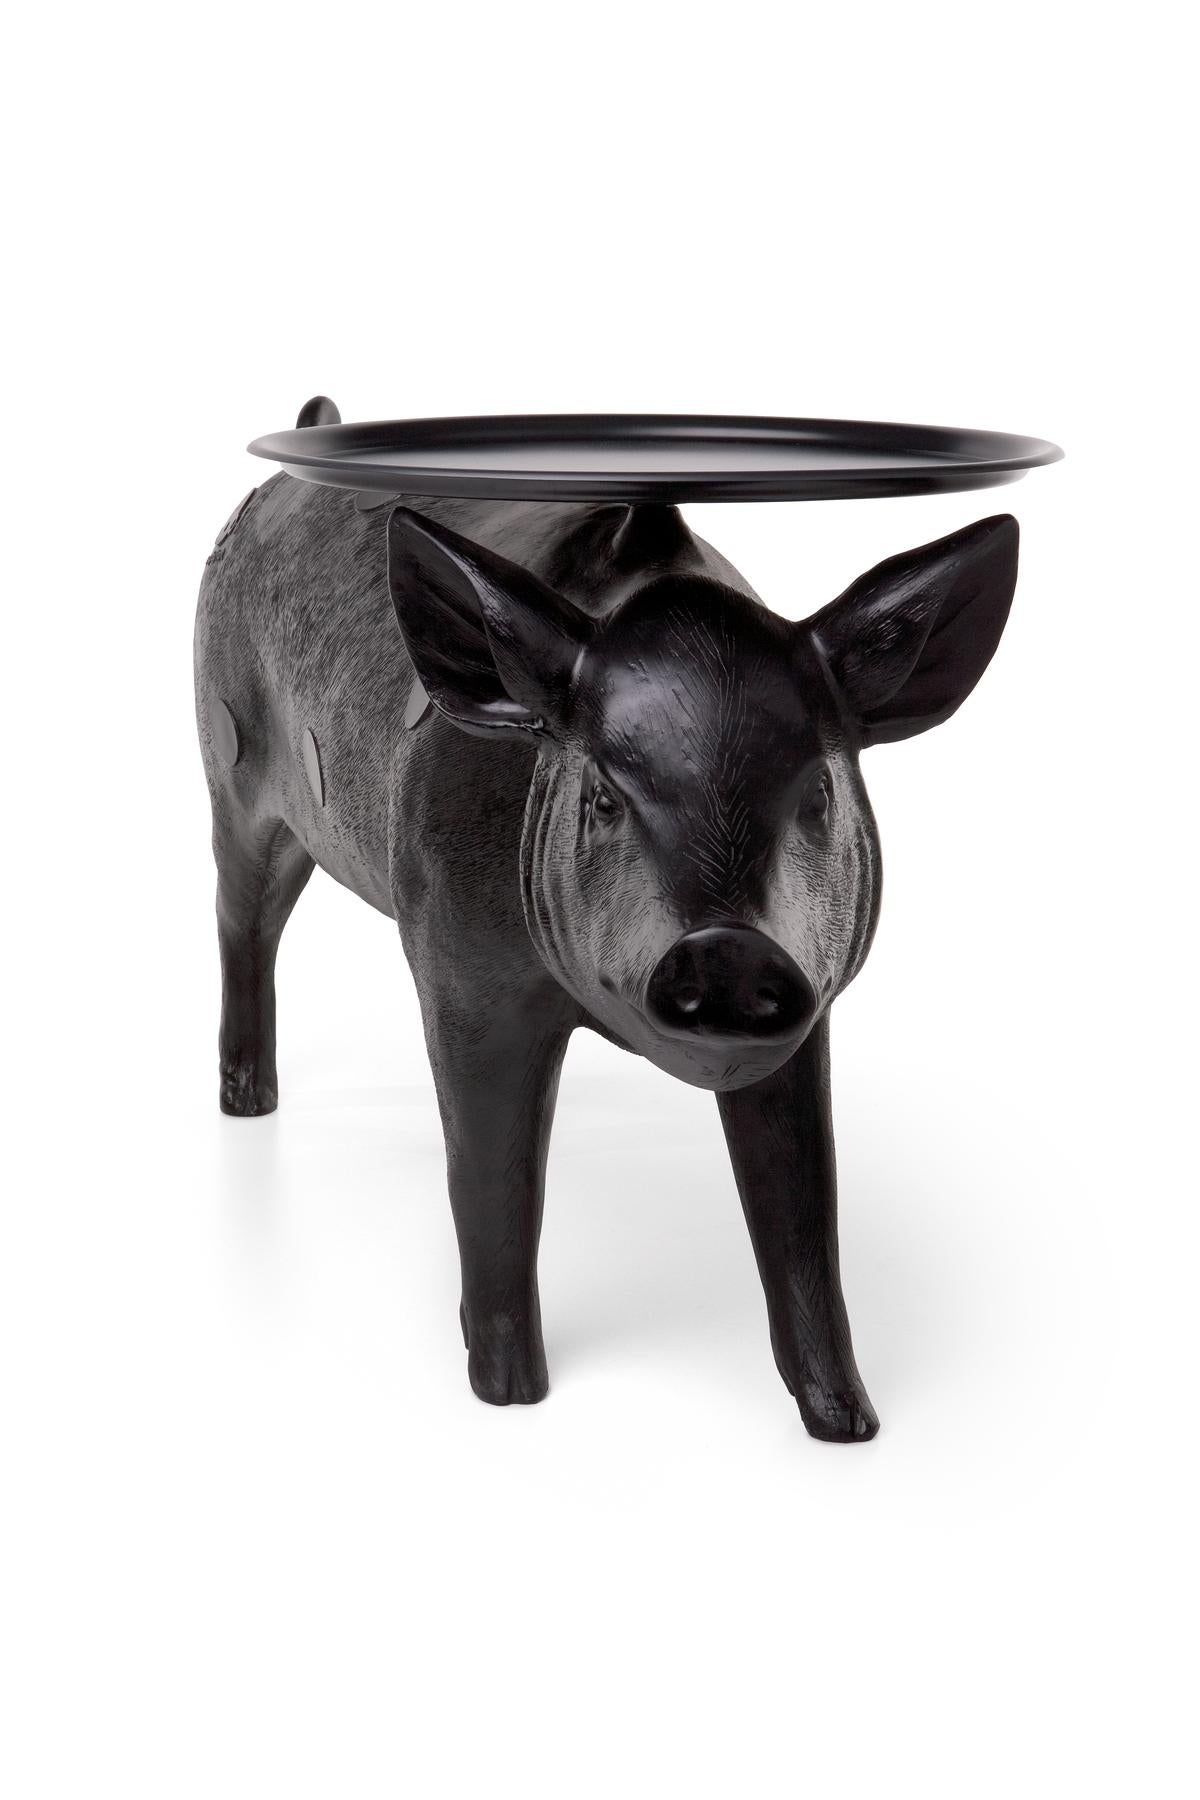 Modern Moooi Pig Table in Polyester & ABS with Black Finish by Front For Sale